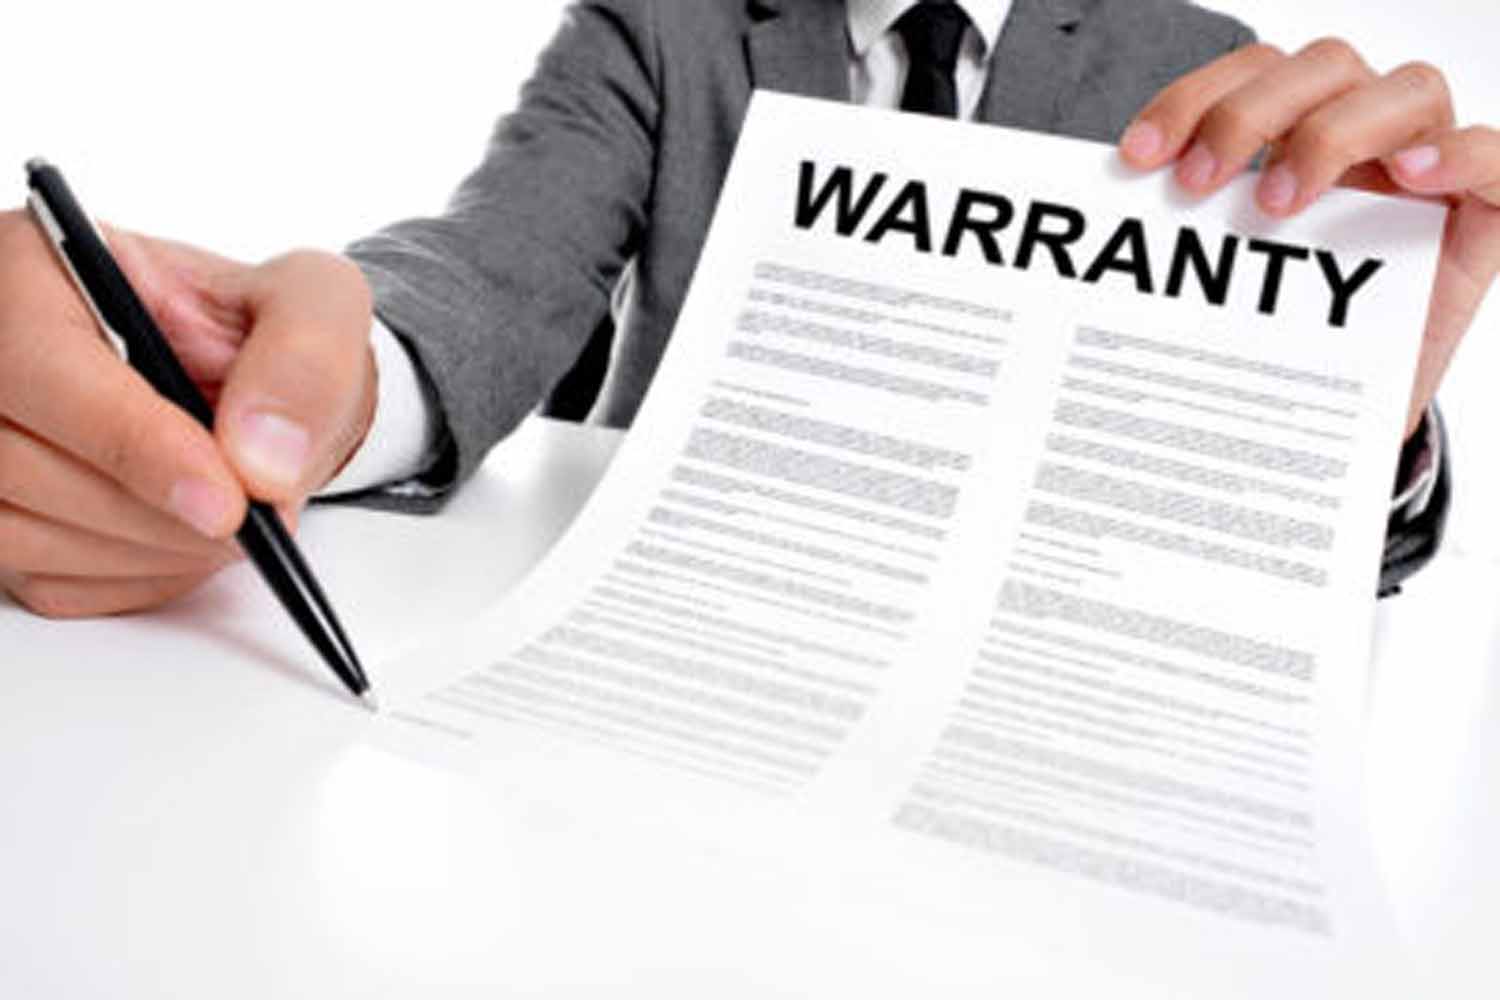 Magnuson-Moss Warranty Act and Arbitration Agreements